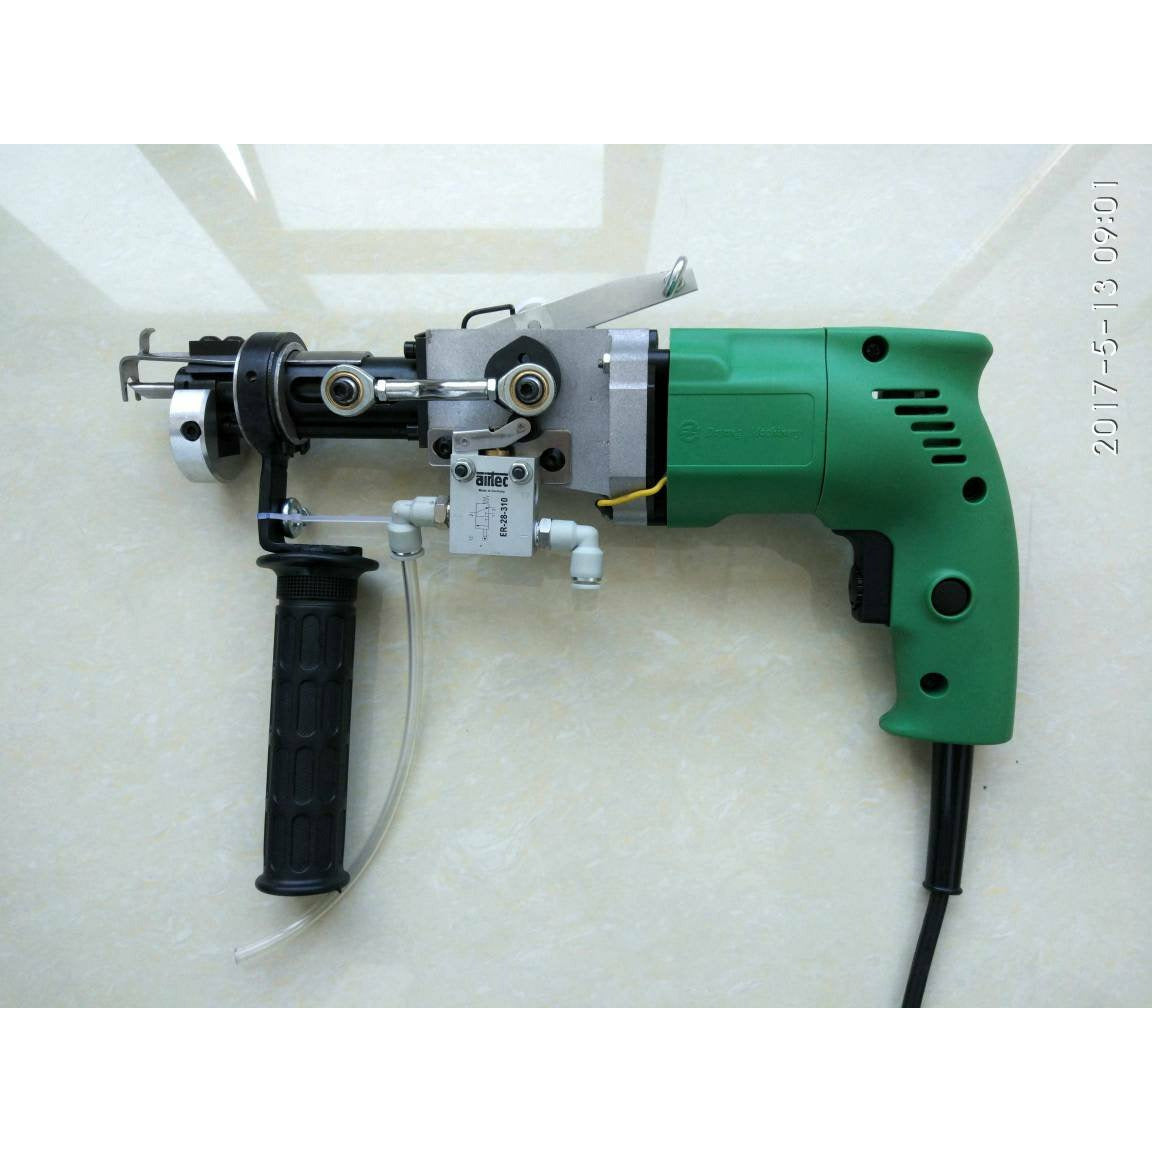 ZQ III Pneumatic Loop and Cut Pile Tufting Machine | FREE SHIPPING